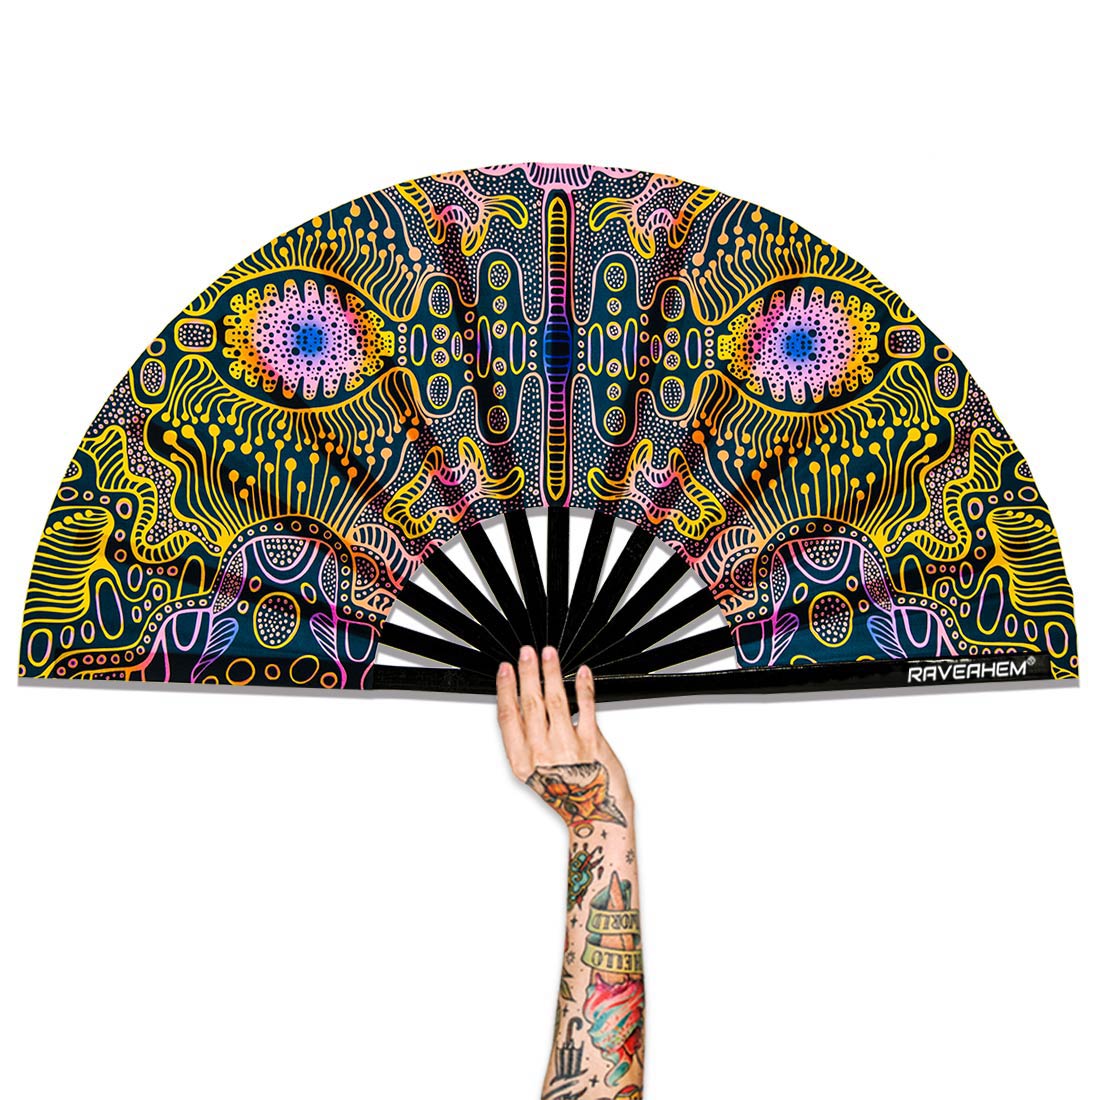 Space psychedelic UV Glow Bamboo Clack Hand Fan For Raves or Festivals